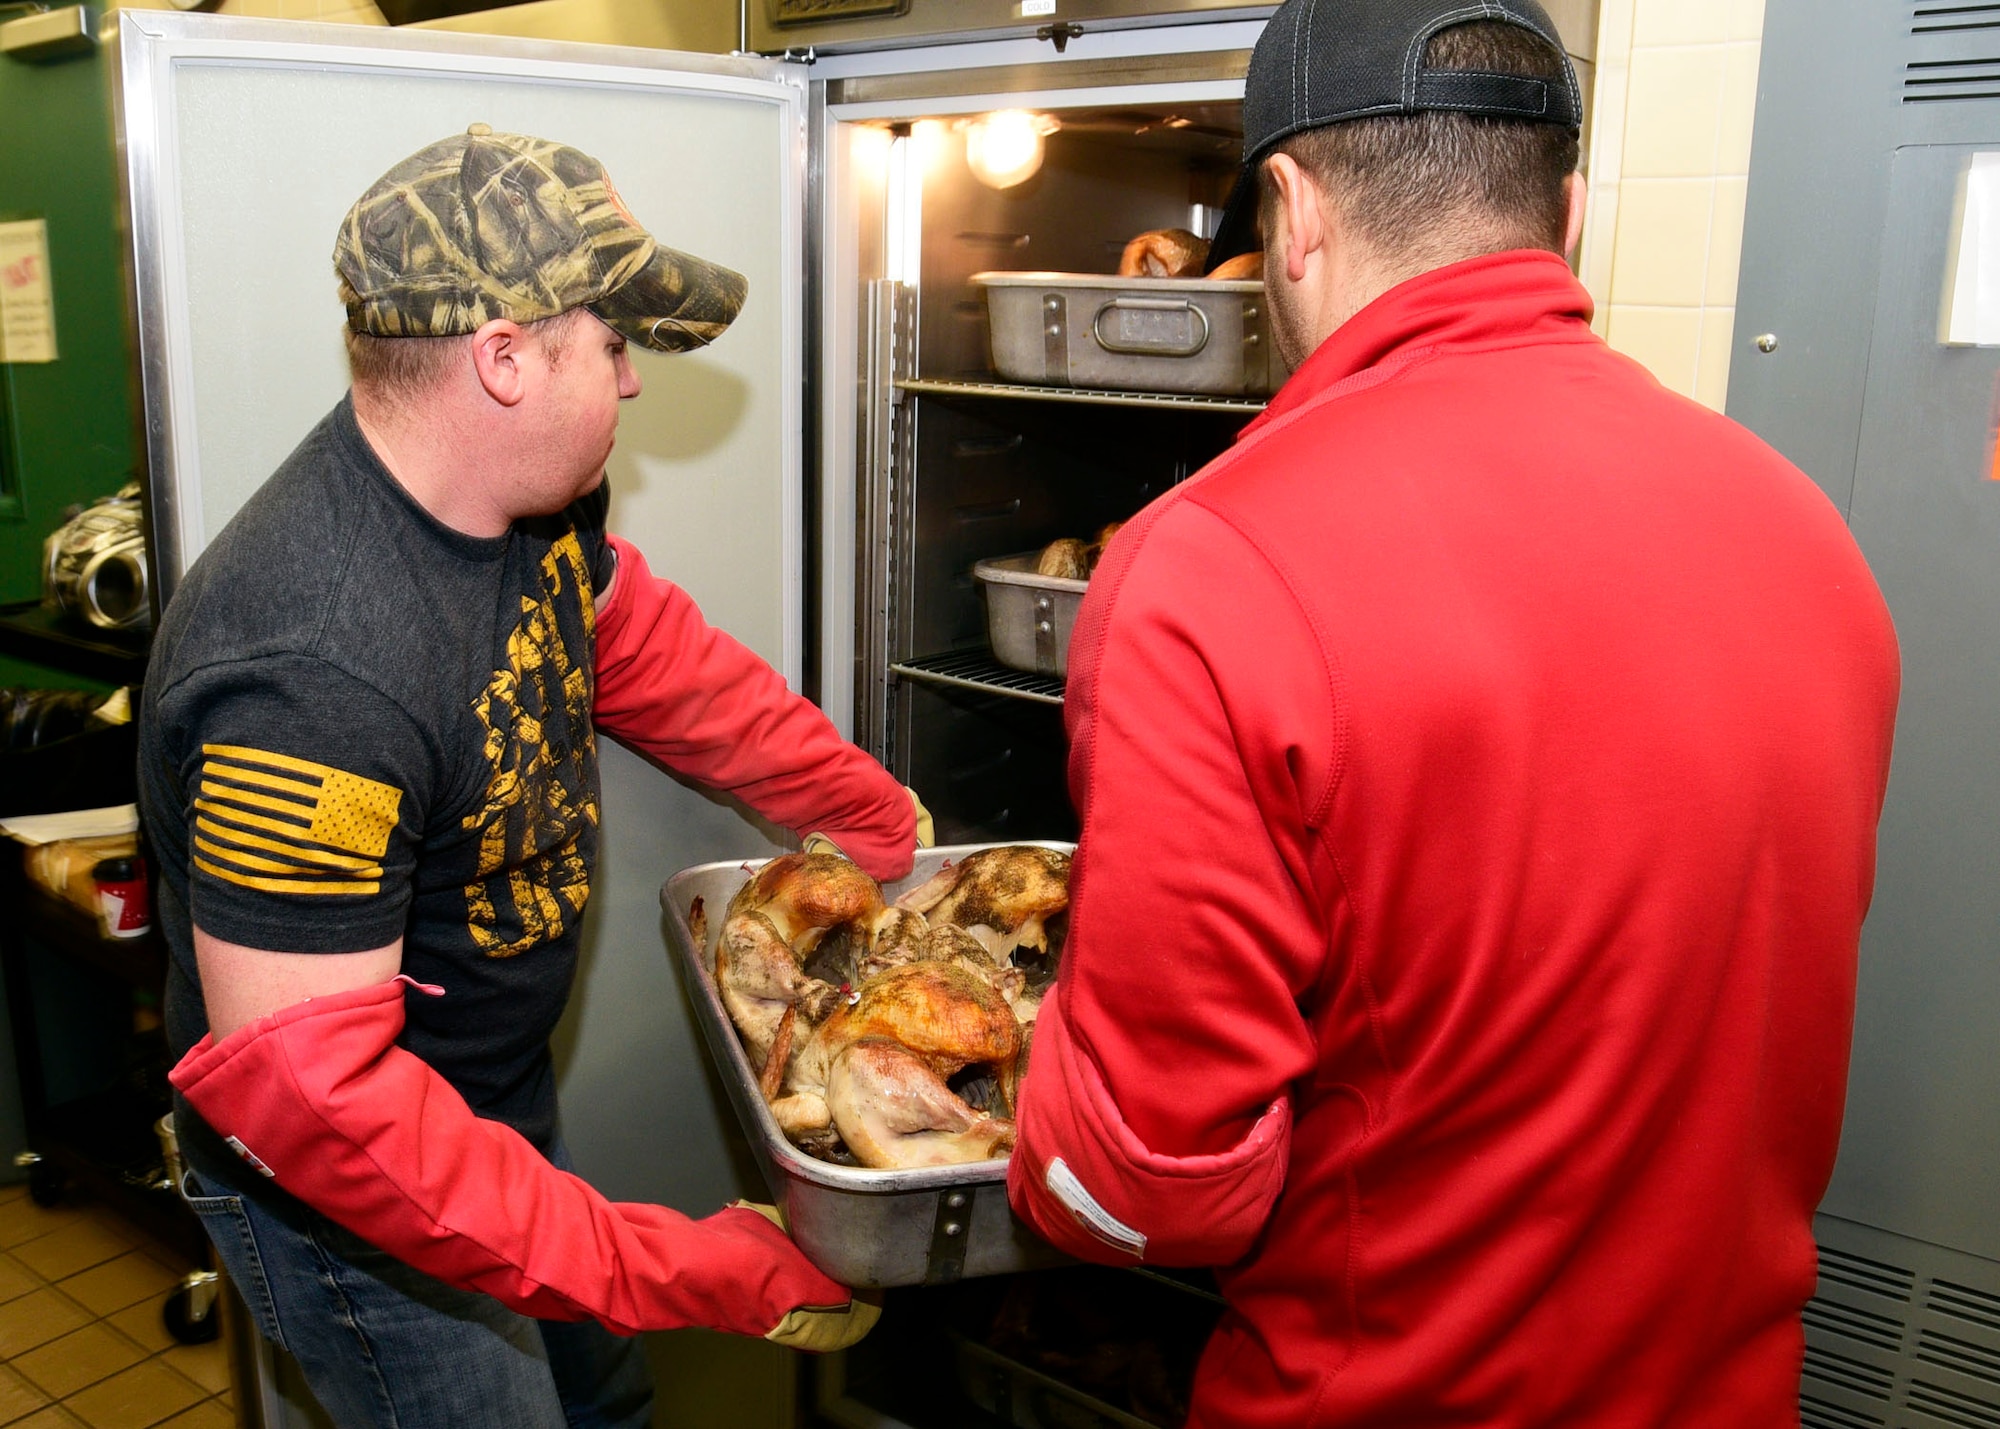 Members of the Montana Air National Guard carry a pan of cooked turkeys to a warming oven at the 120th Airlift Wing Dining Facility at the Great Falls International Airport in Great Falls, Montana Dec. 24, 2017. The guard personnel volunteered to prepare 50 turkeys, dressing and gravy and delivered the food to the Great Falls Senior Citizen Center to be served during the 25th Annual Danny Berg Memorial Christmas Dinner. (U.S. Air National Guard photo/Senior Master Sgt. Eric Peterson)